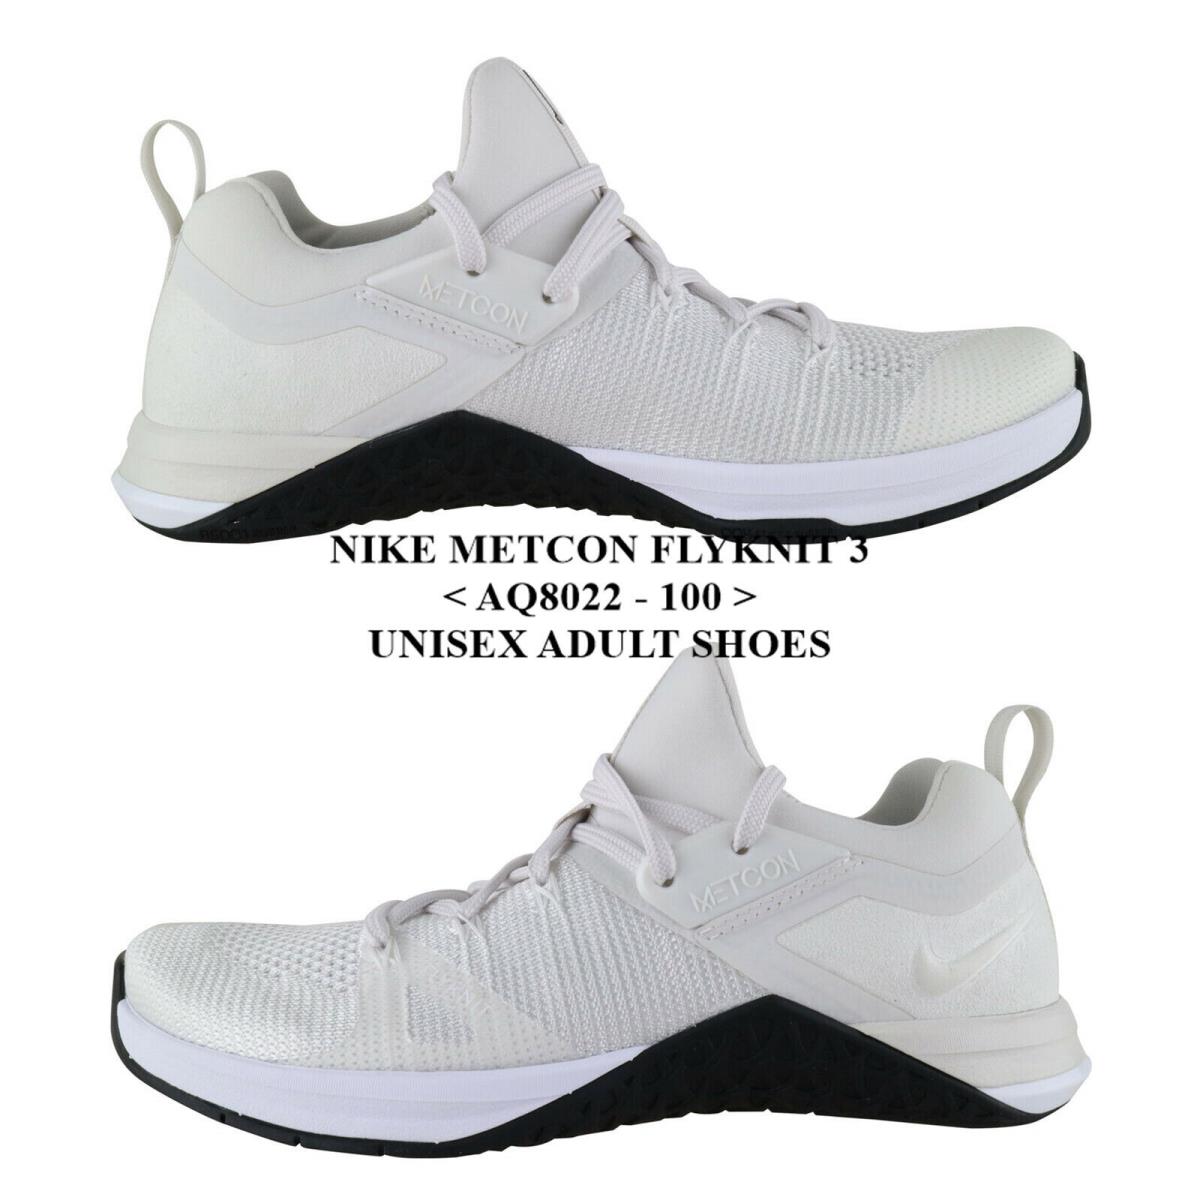 Nike Metcon Flyknit 3<AQ8022 - 100>.UNISEX Adults Athletic Shoes with Box